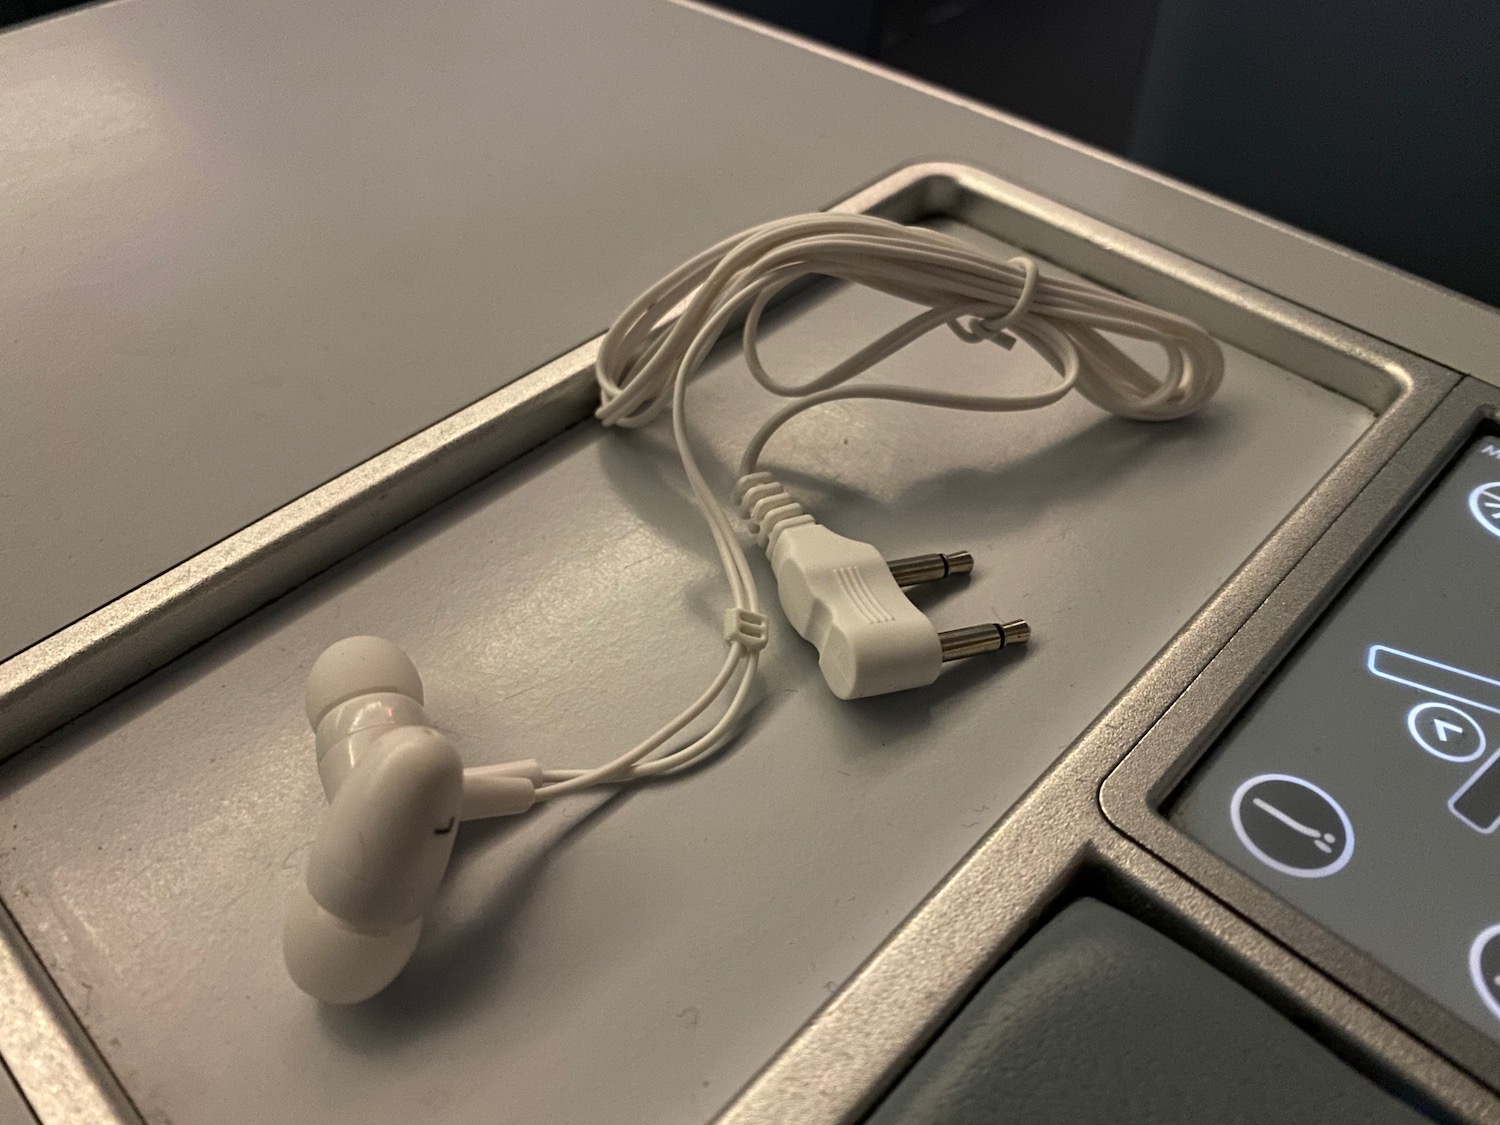 a white earbuds on a grey surface